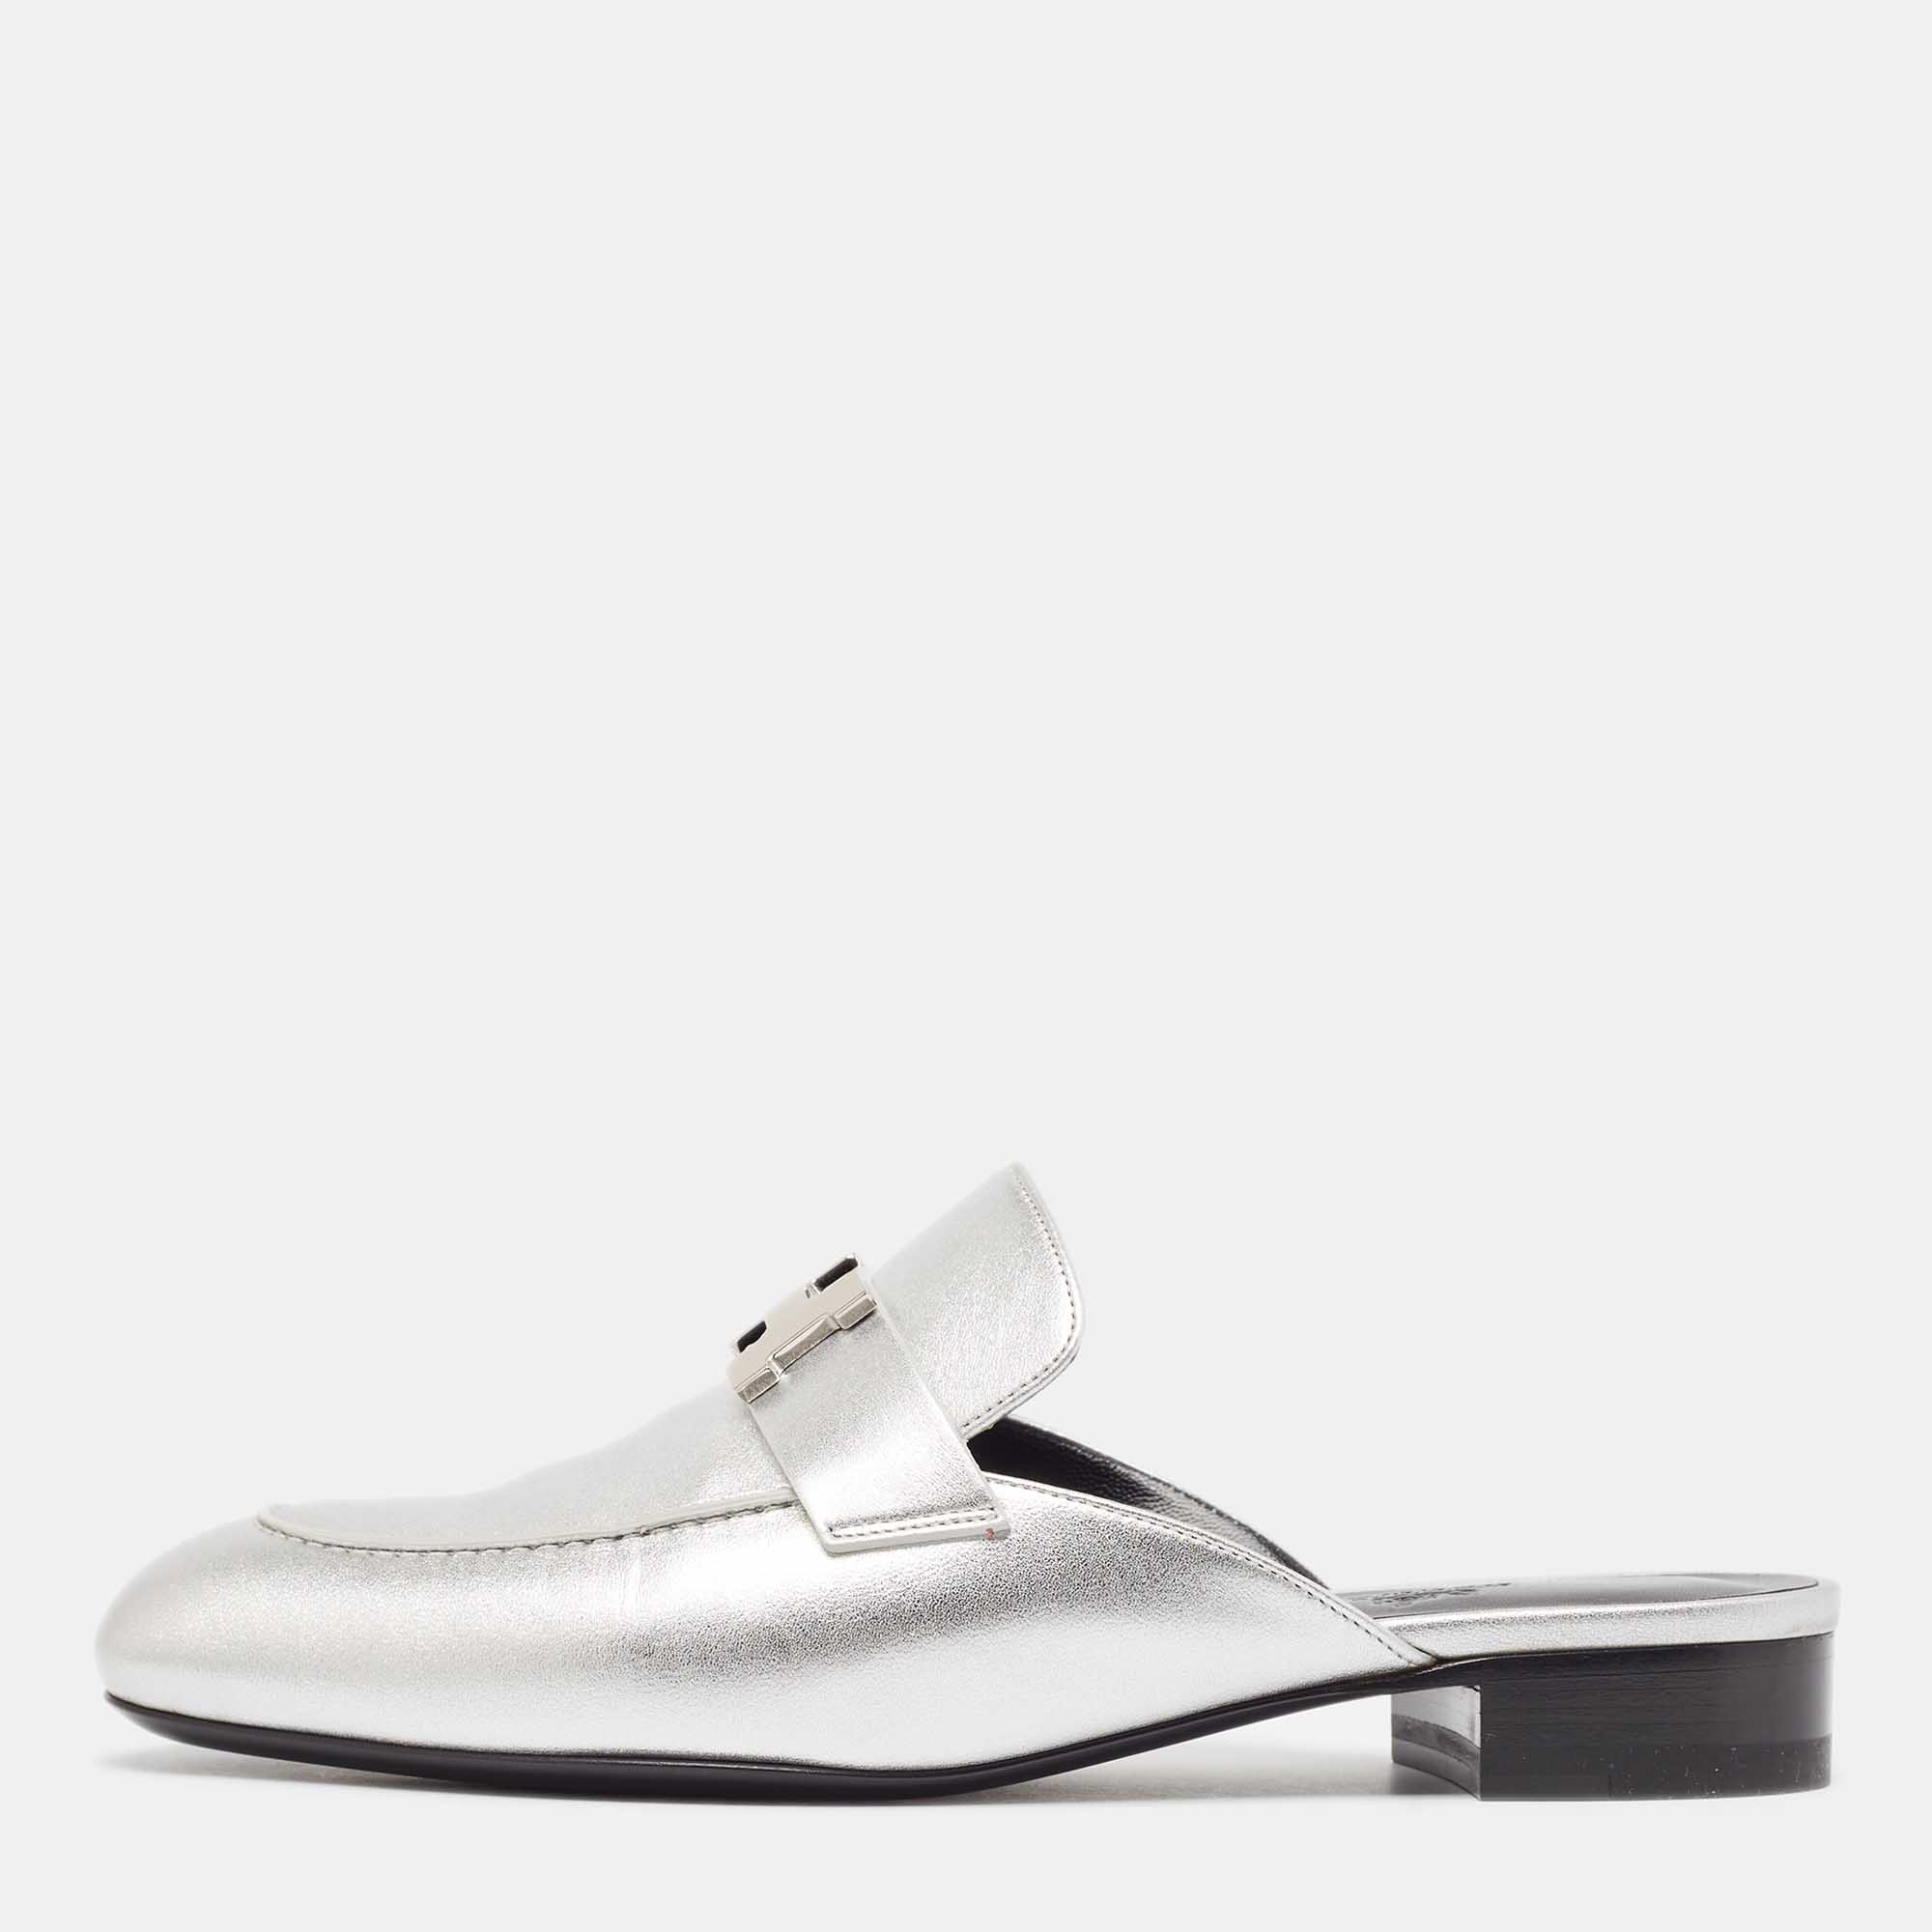 Hermes silver leather trocadero mules size 38